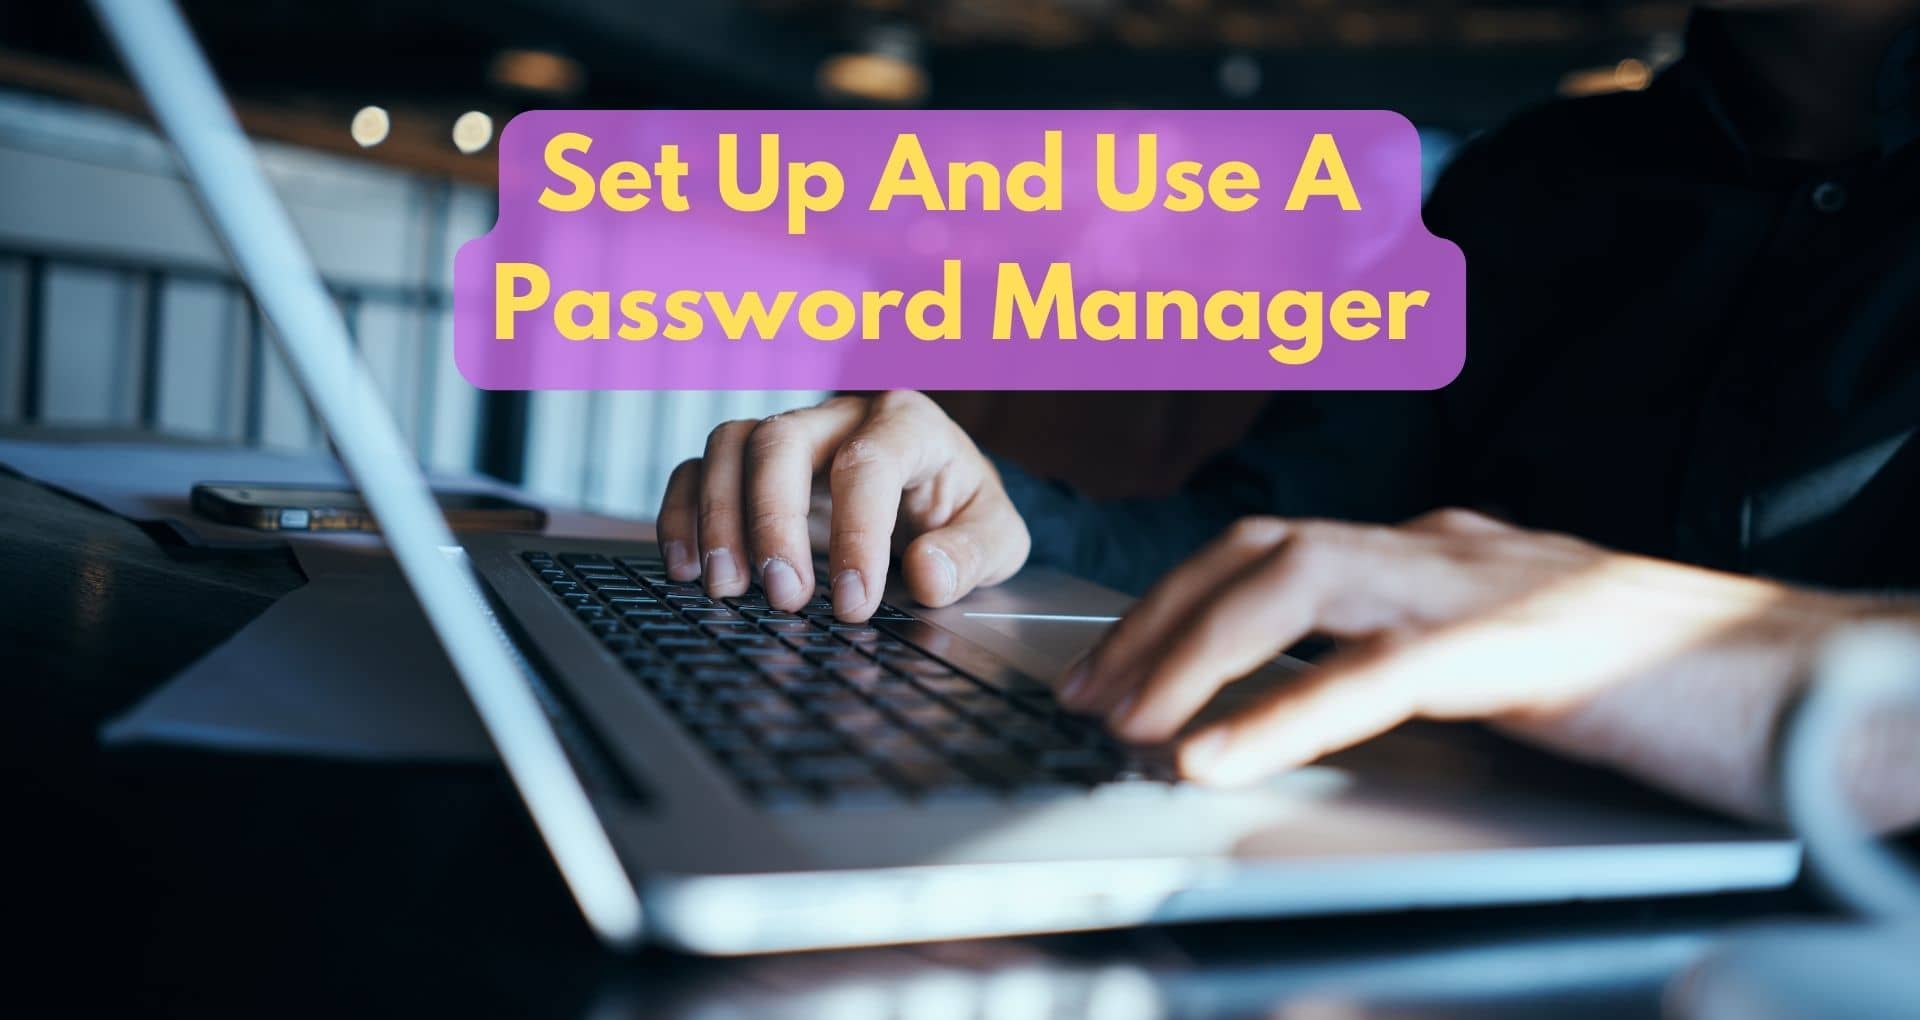 How To Set Up And Use A Password Manager?